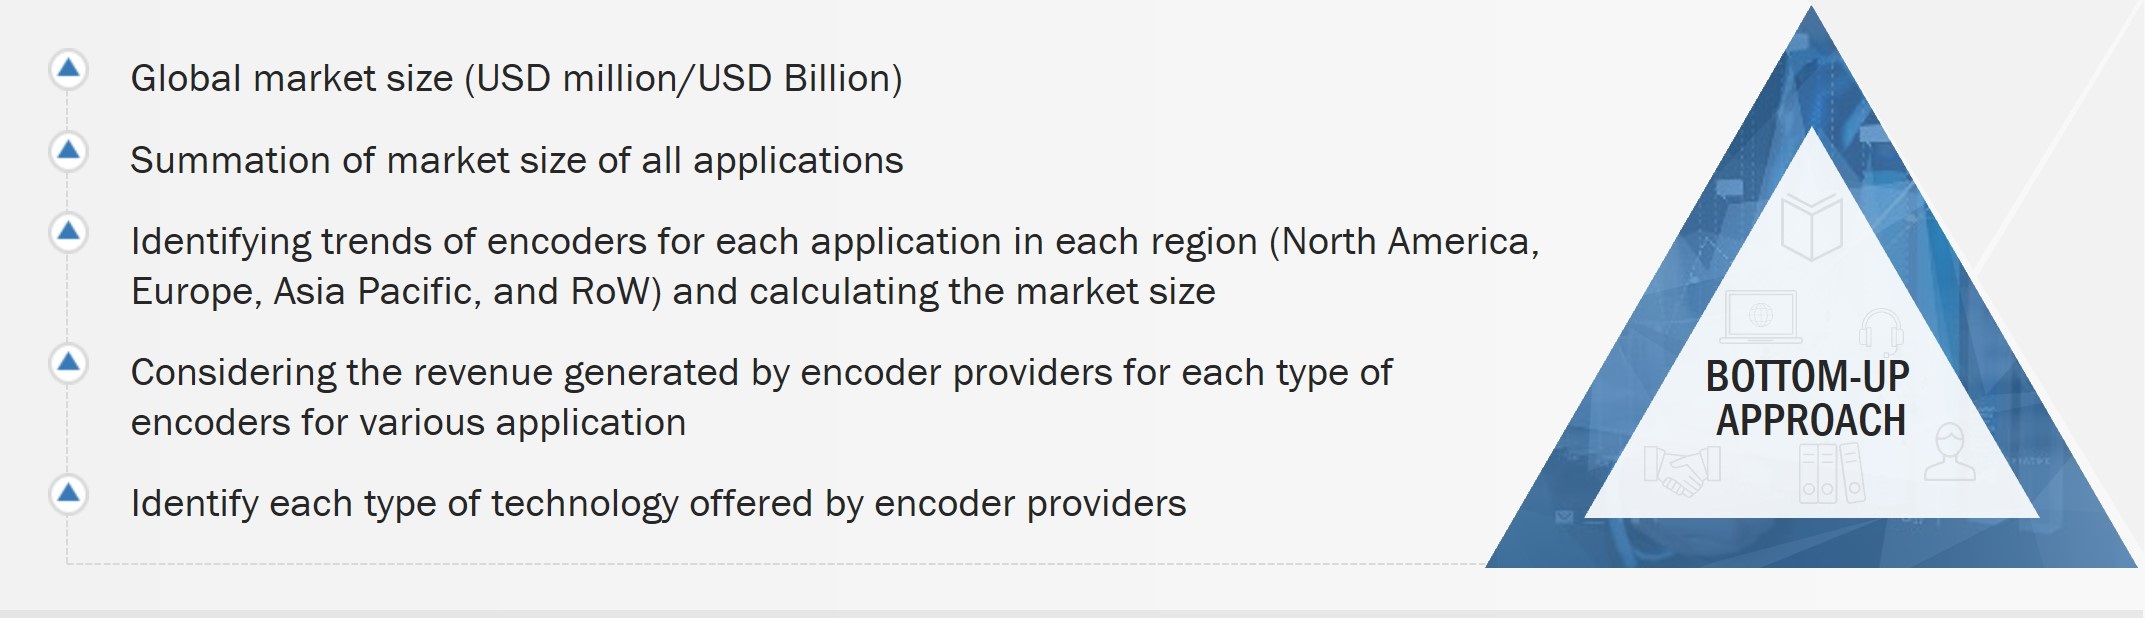 Encoder Market Size, and Bottom-Up Approach 